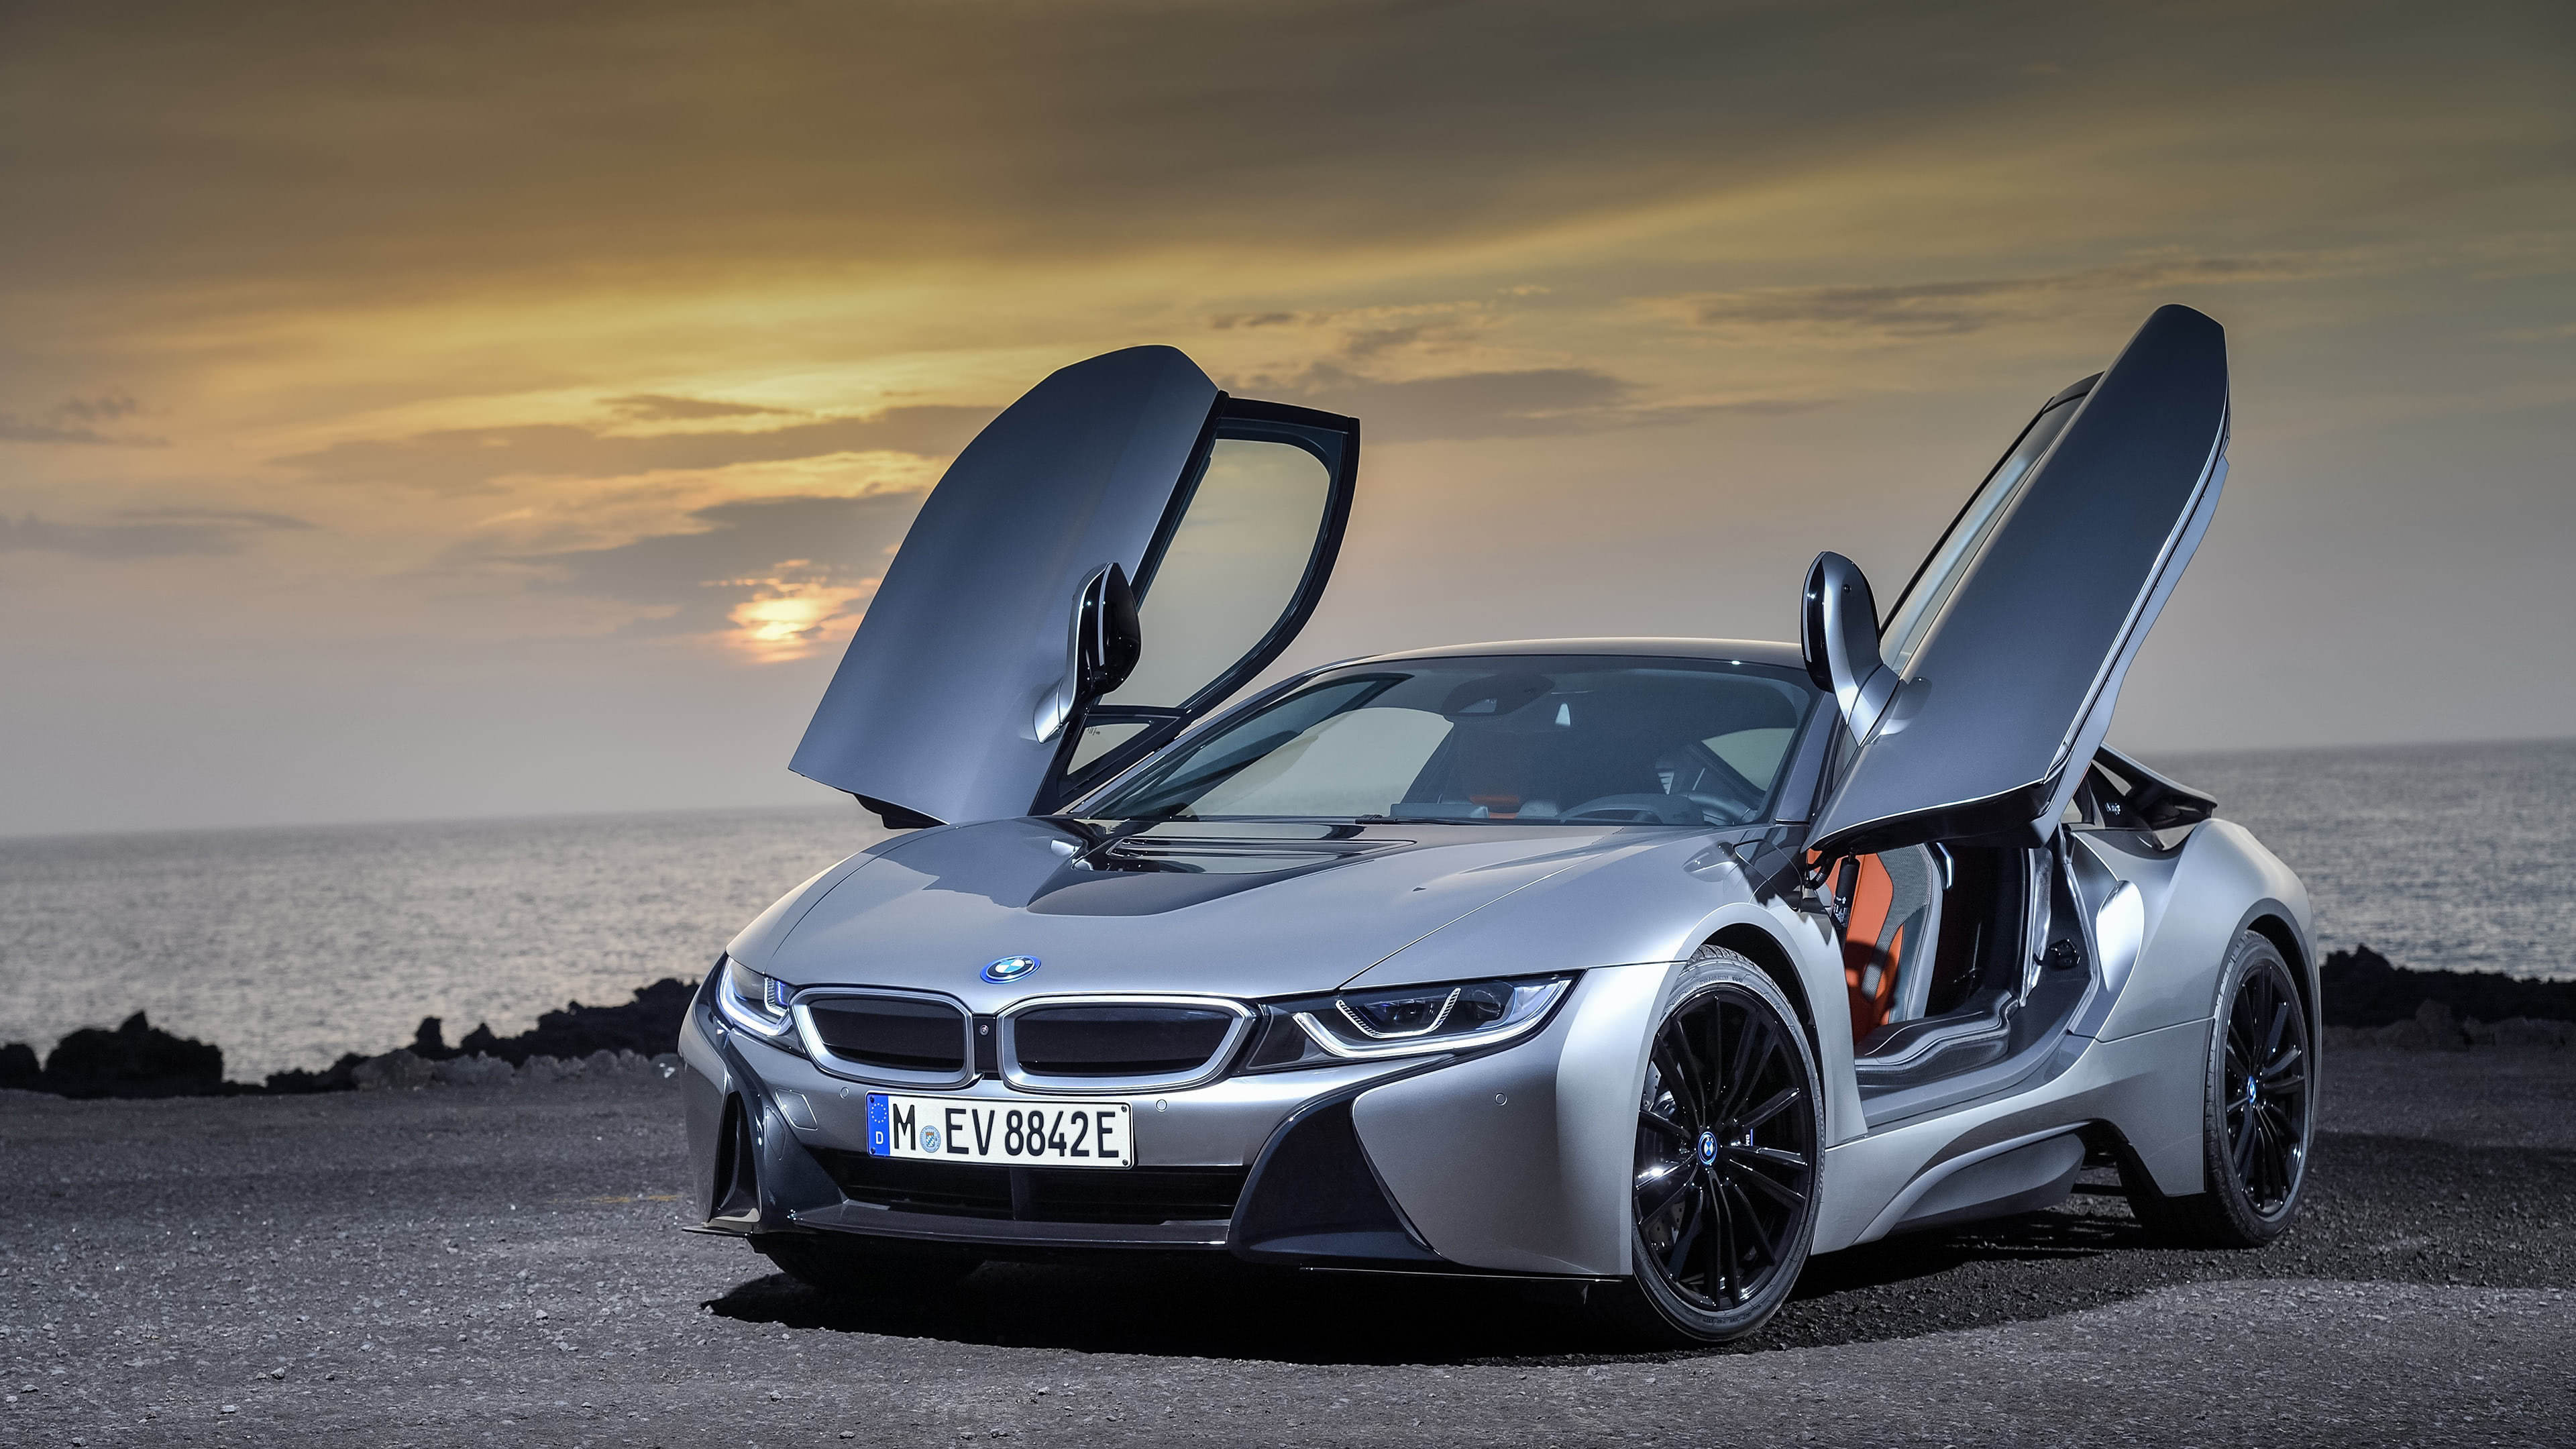 BMW i8, Silver dream, Stunning 4K wallpapers, Automotive excellence, Unparalleled performance, 3840x2160 4K Desktop